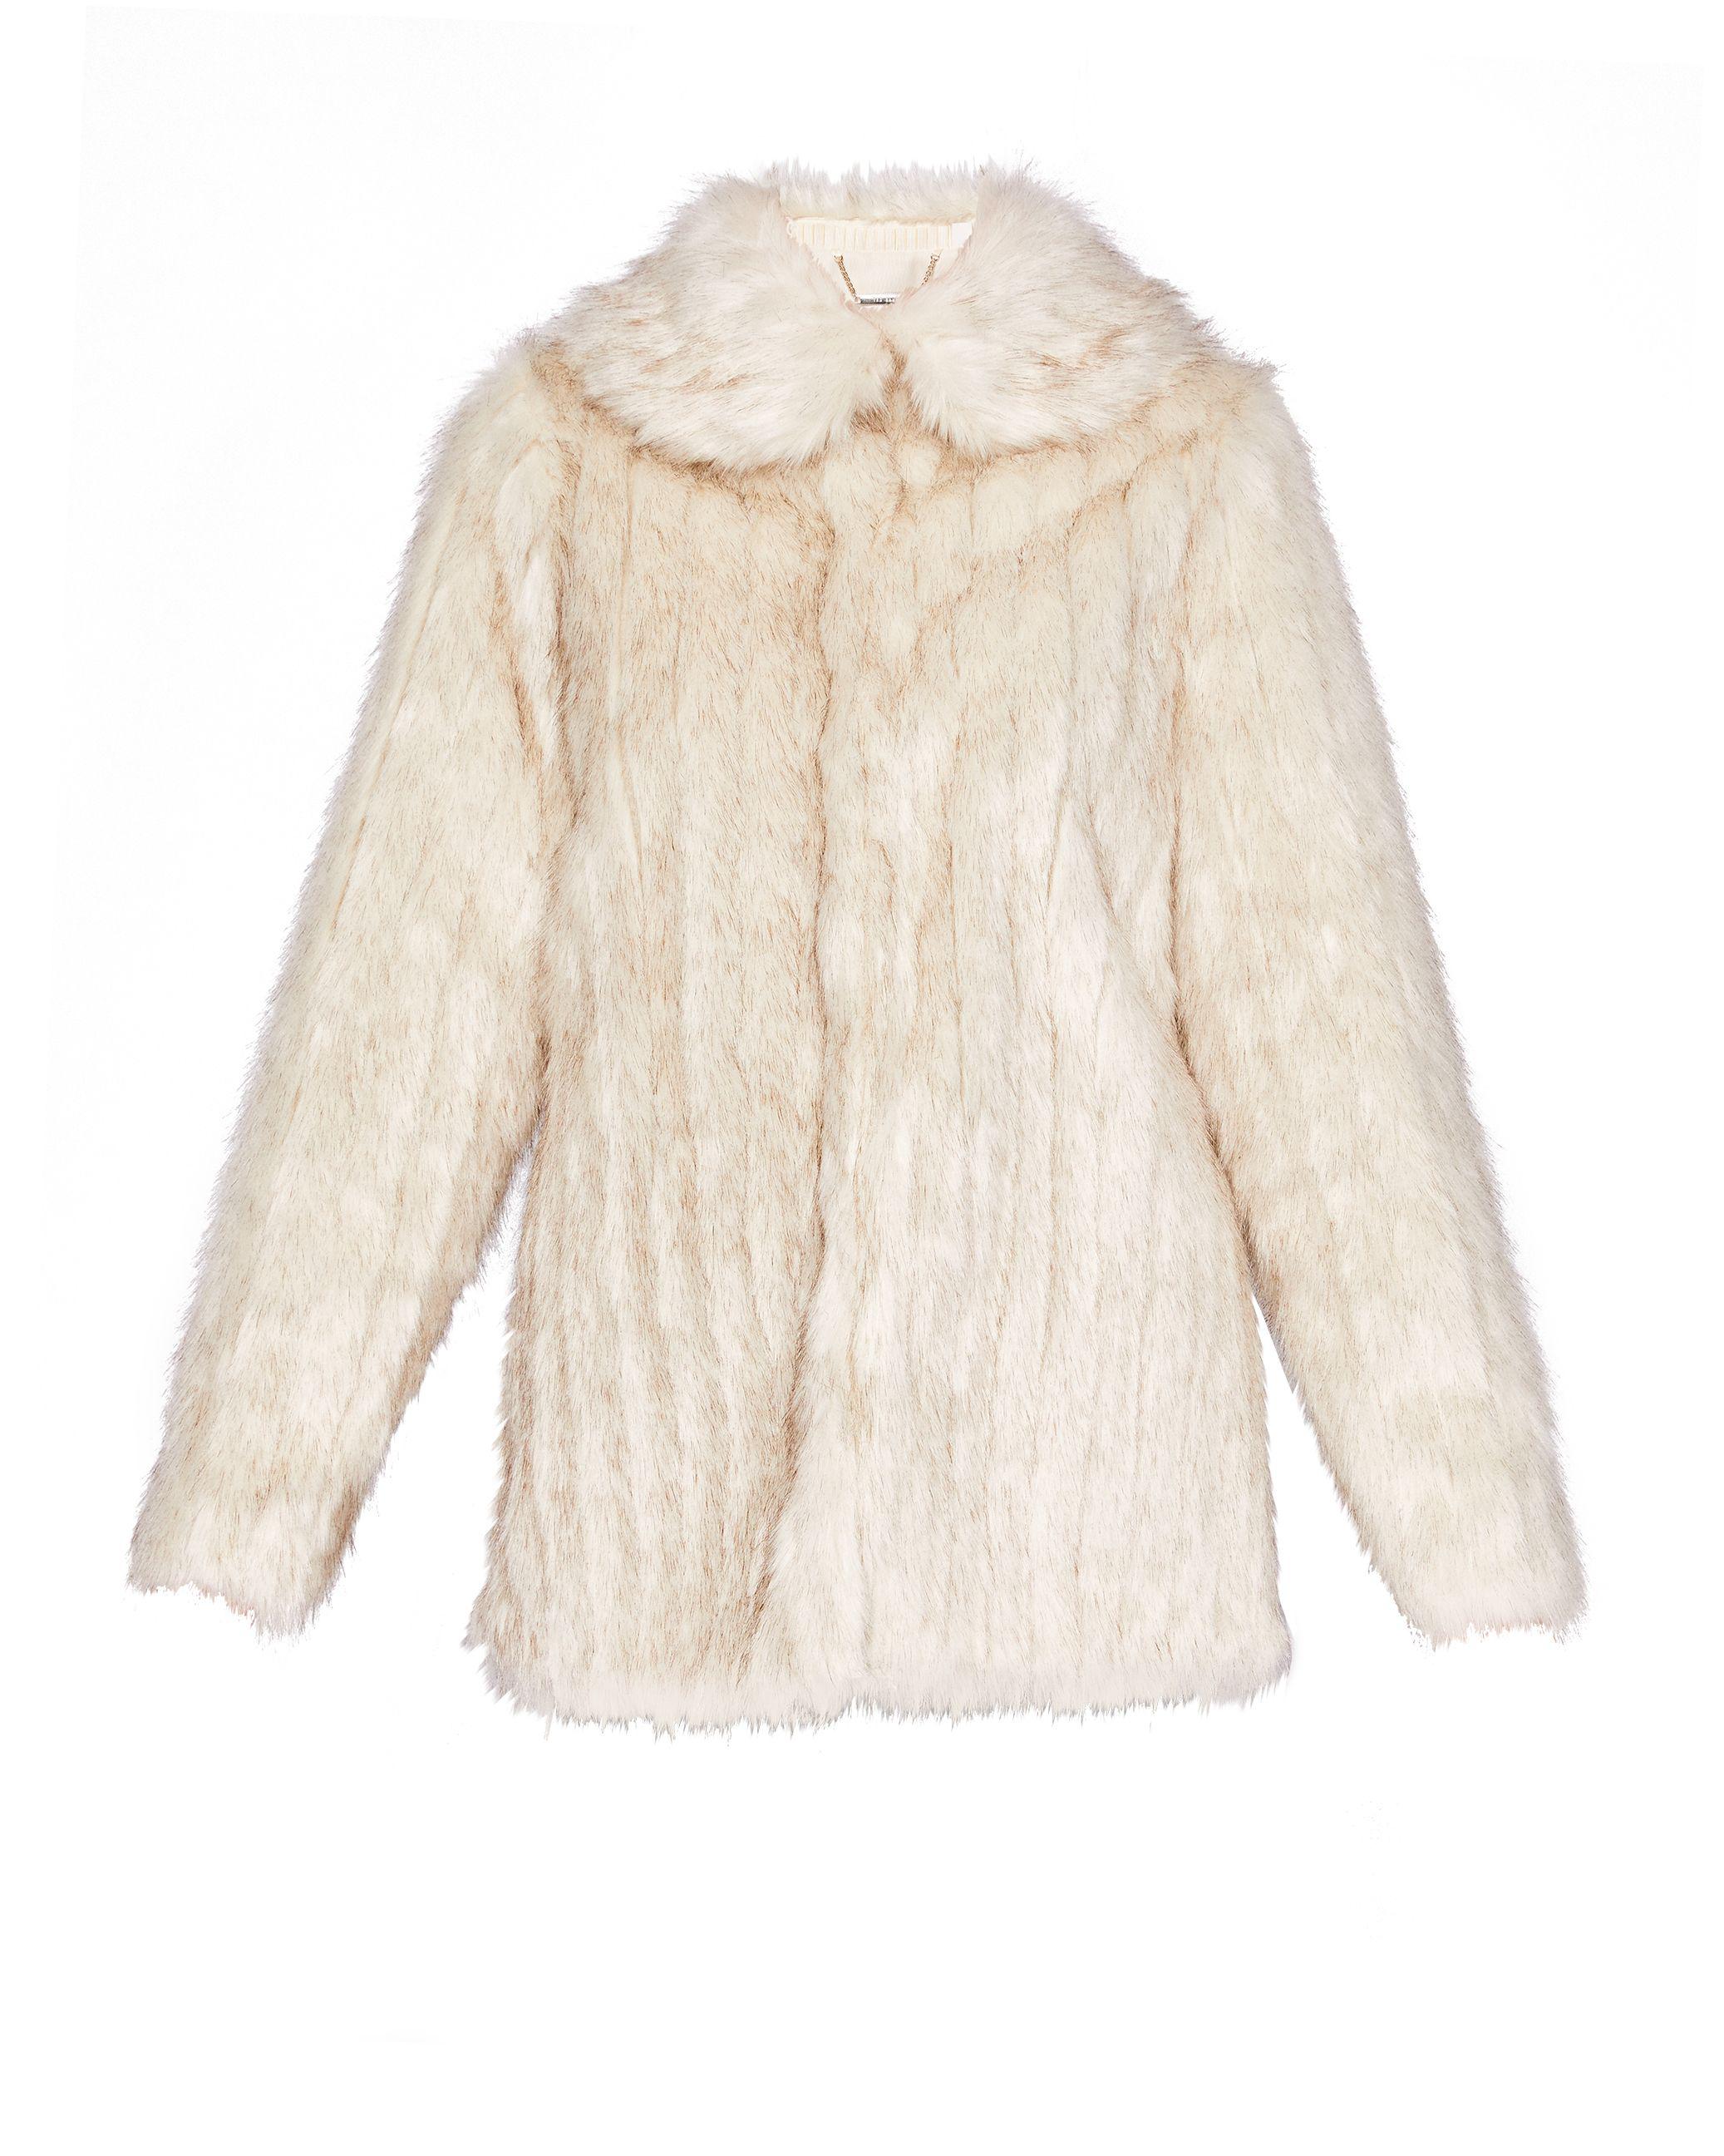 Ted Baker Faux Fur Collared Coat in Ivory (White) - Lyst